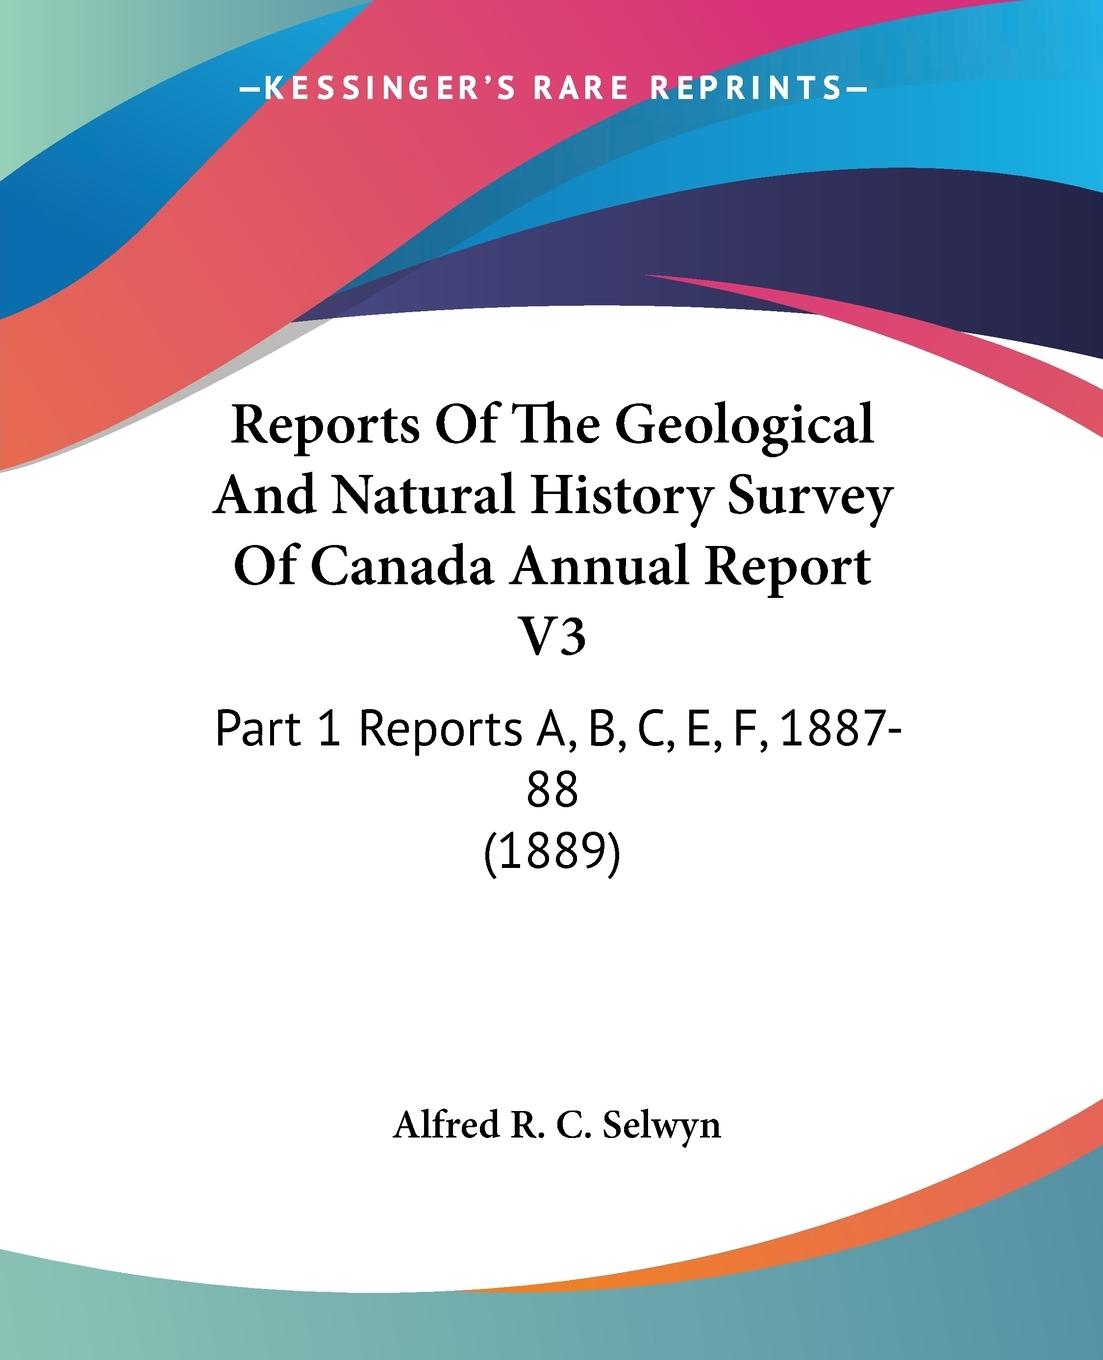 Reports Of The Geological And Natural History Survey Of Canada Annual Report V3 - Selwyn, Alfred R. C.